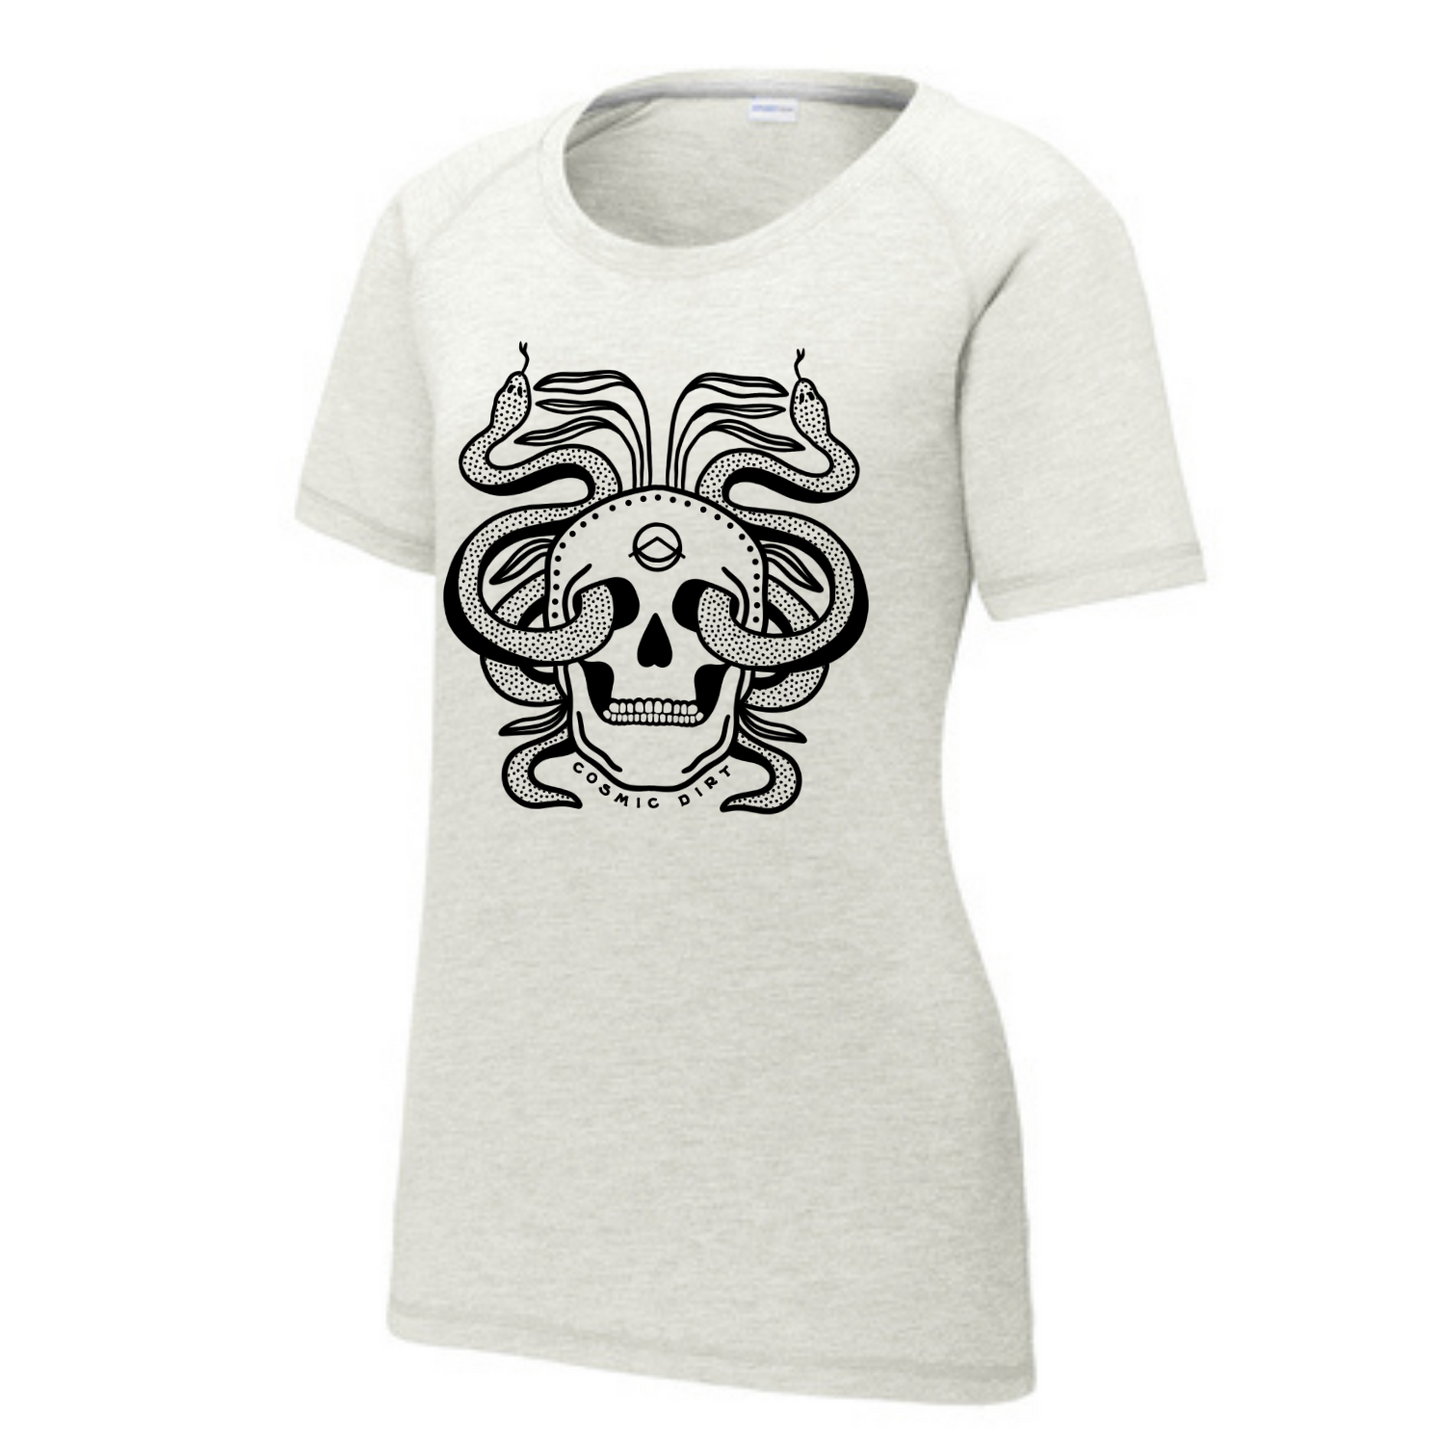 Snake Eyes Short Sleeve Tech Tee - Fitted